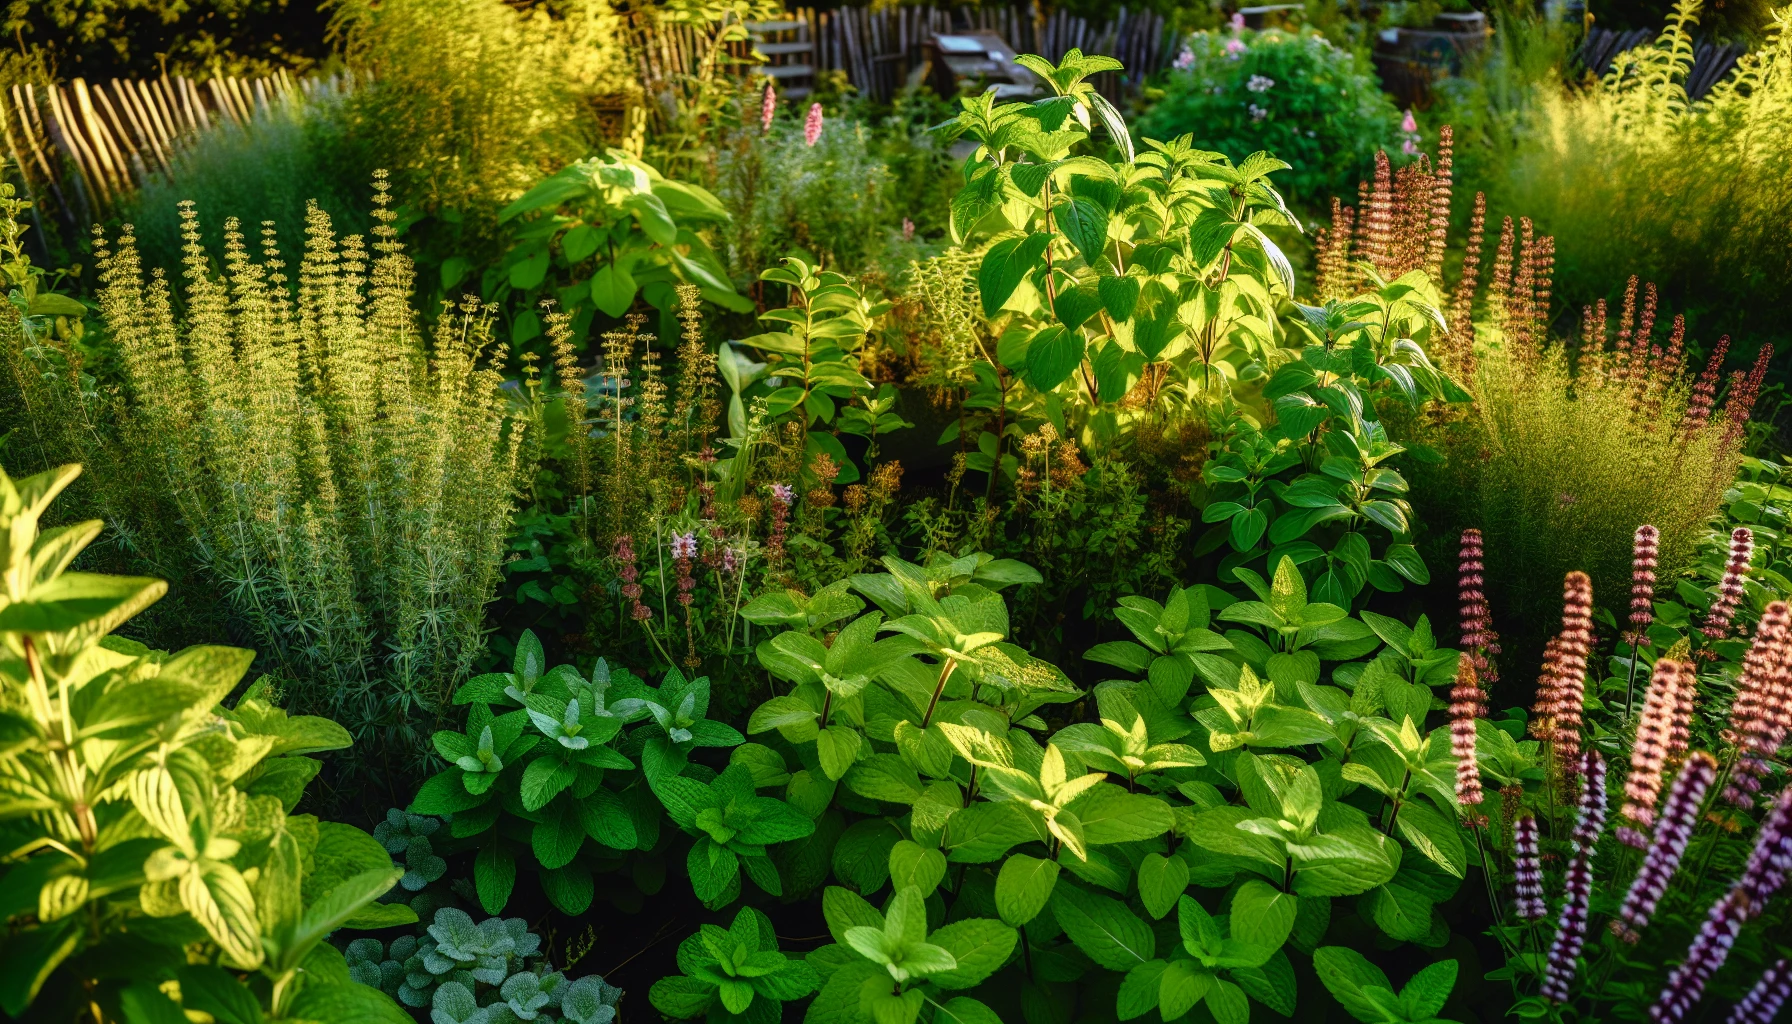 Medicinal herb garden with various herb plants